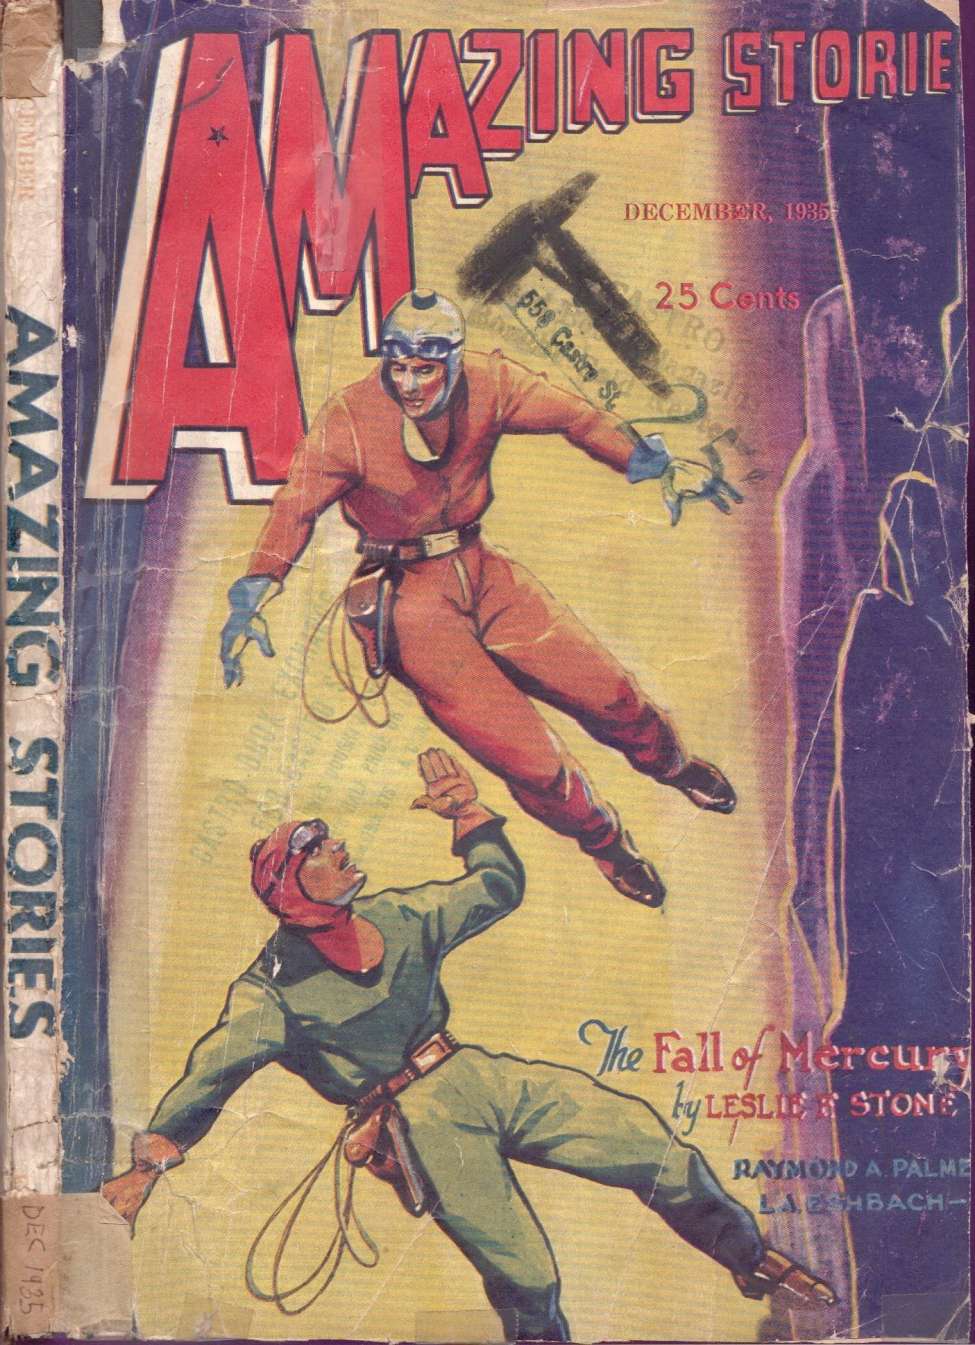 Book Cover For Amazing Stories v10 7 - The Fall of Mercury - Leslie F. Stone